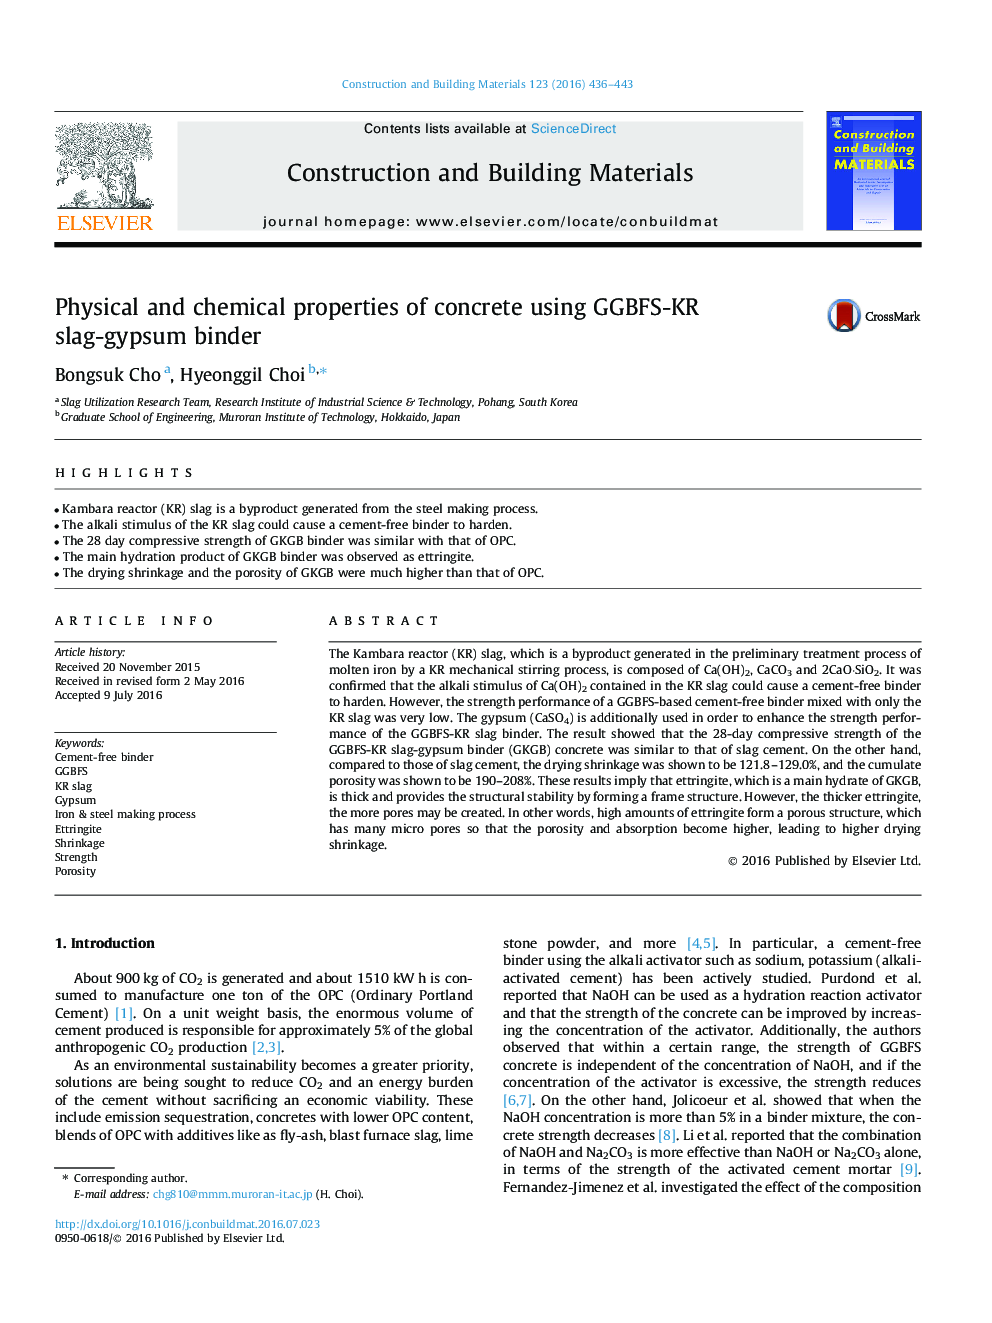 Physical and chemical properties of concrete using GGBFS-KR slag-gypsum binder